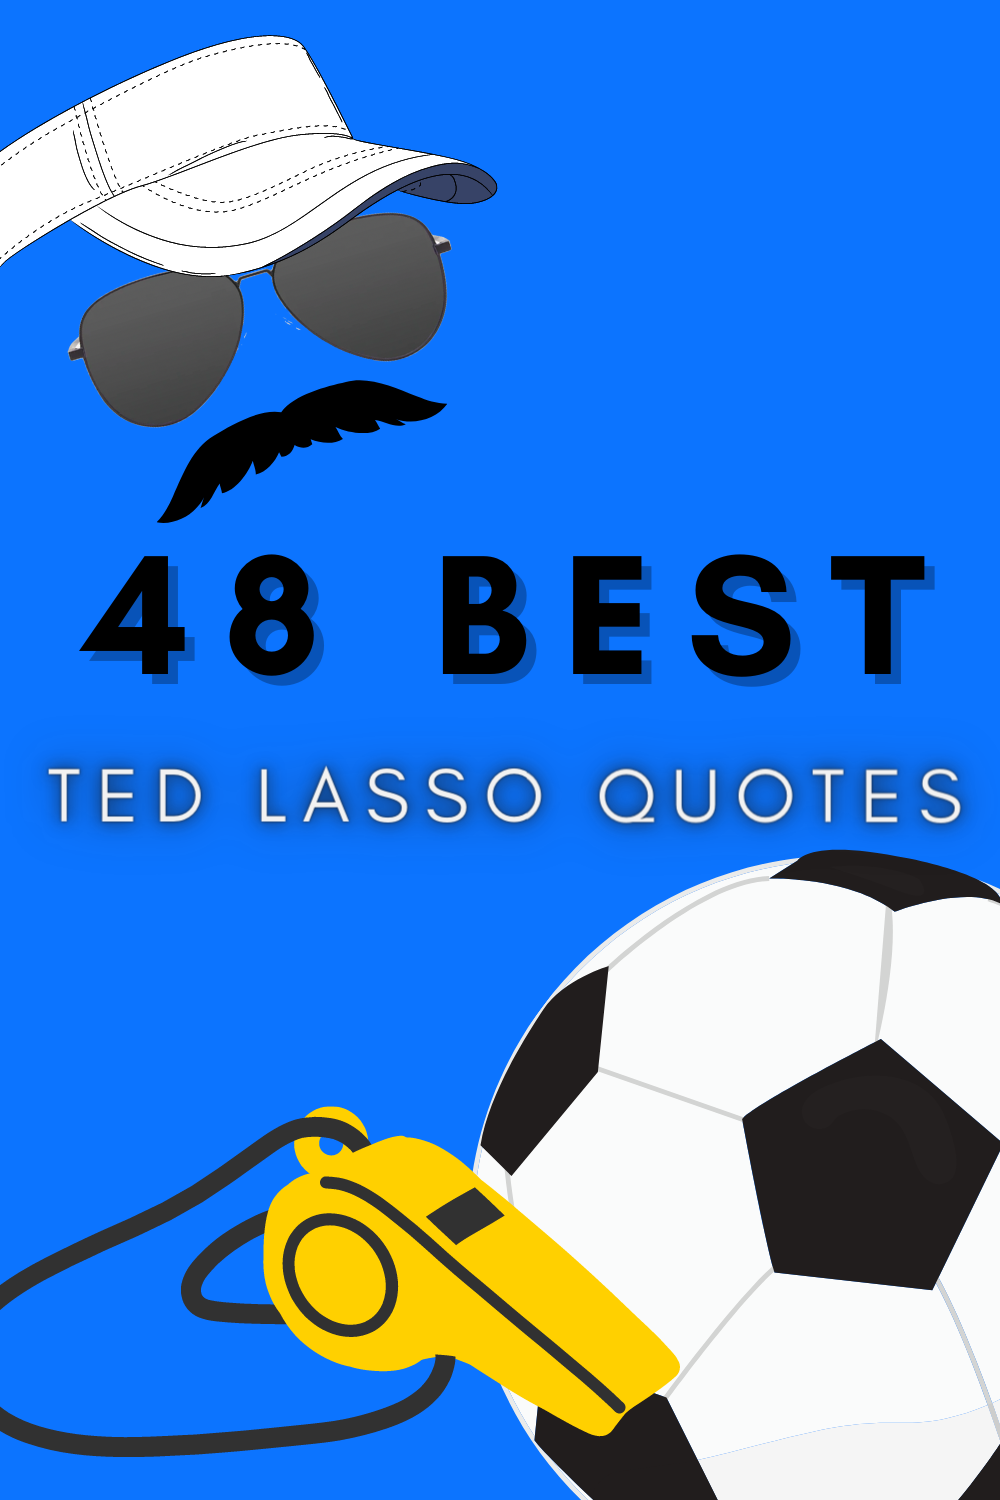 48 BEST TED LASSO QUOTES